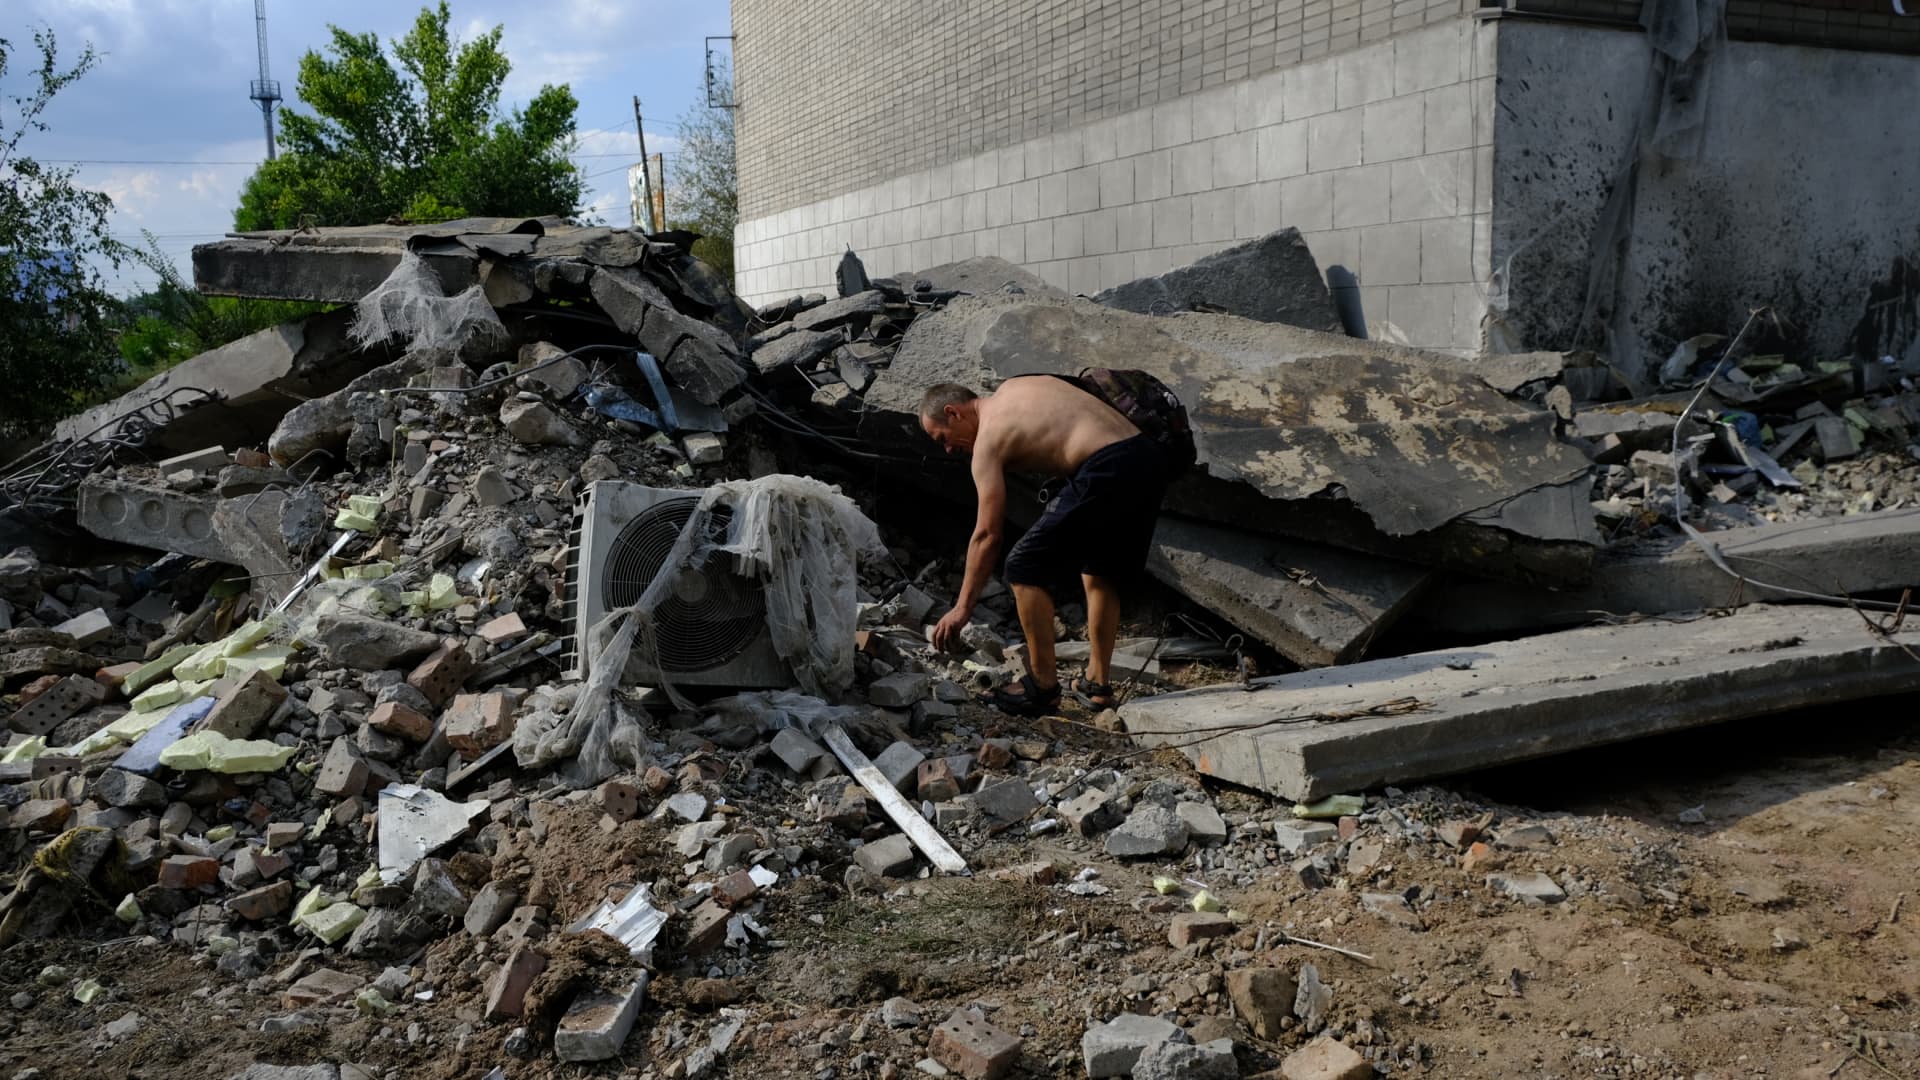 Toretsk, in the Donetsk Oblast of Ukraine, was targeted previously by Russian forces. Here, local residents search for their belongings amid rubbles of a building damaged in an attack by Russian forces on the city on July 28, 2022.